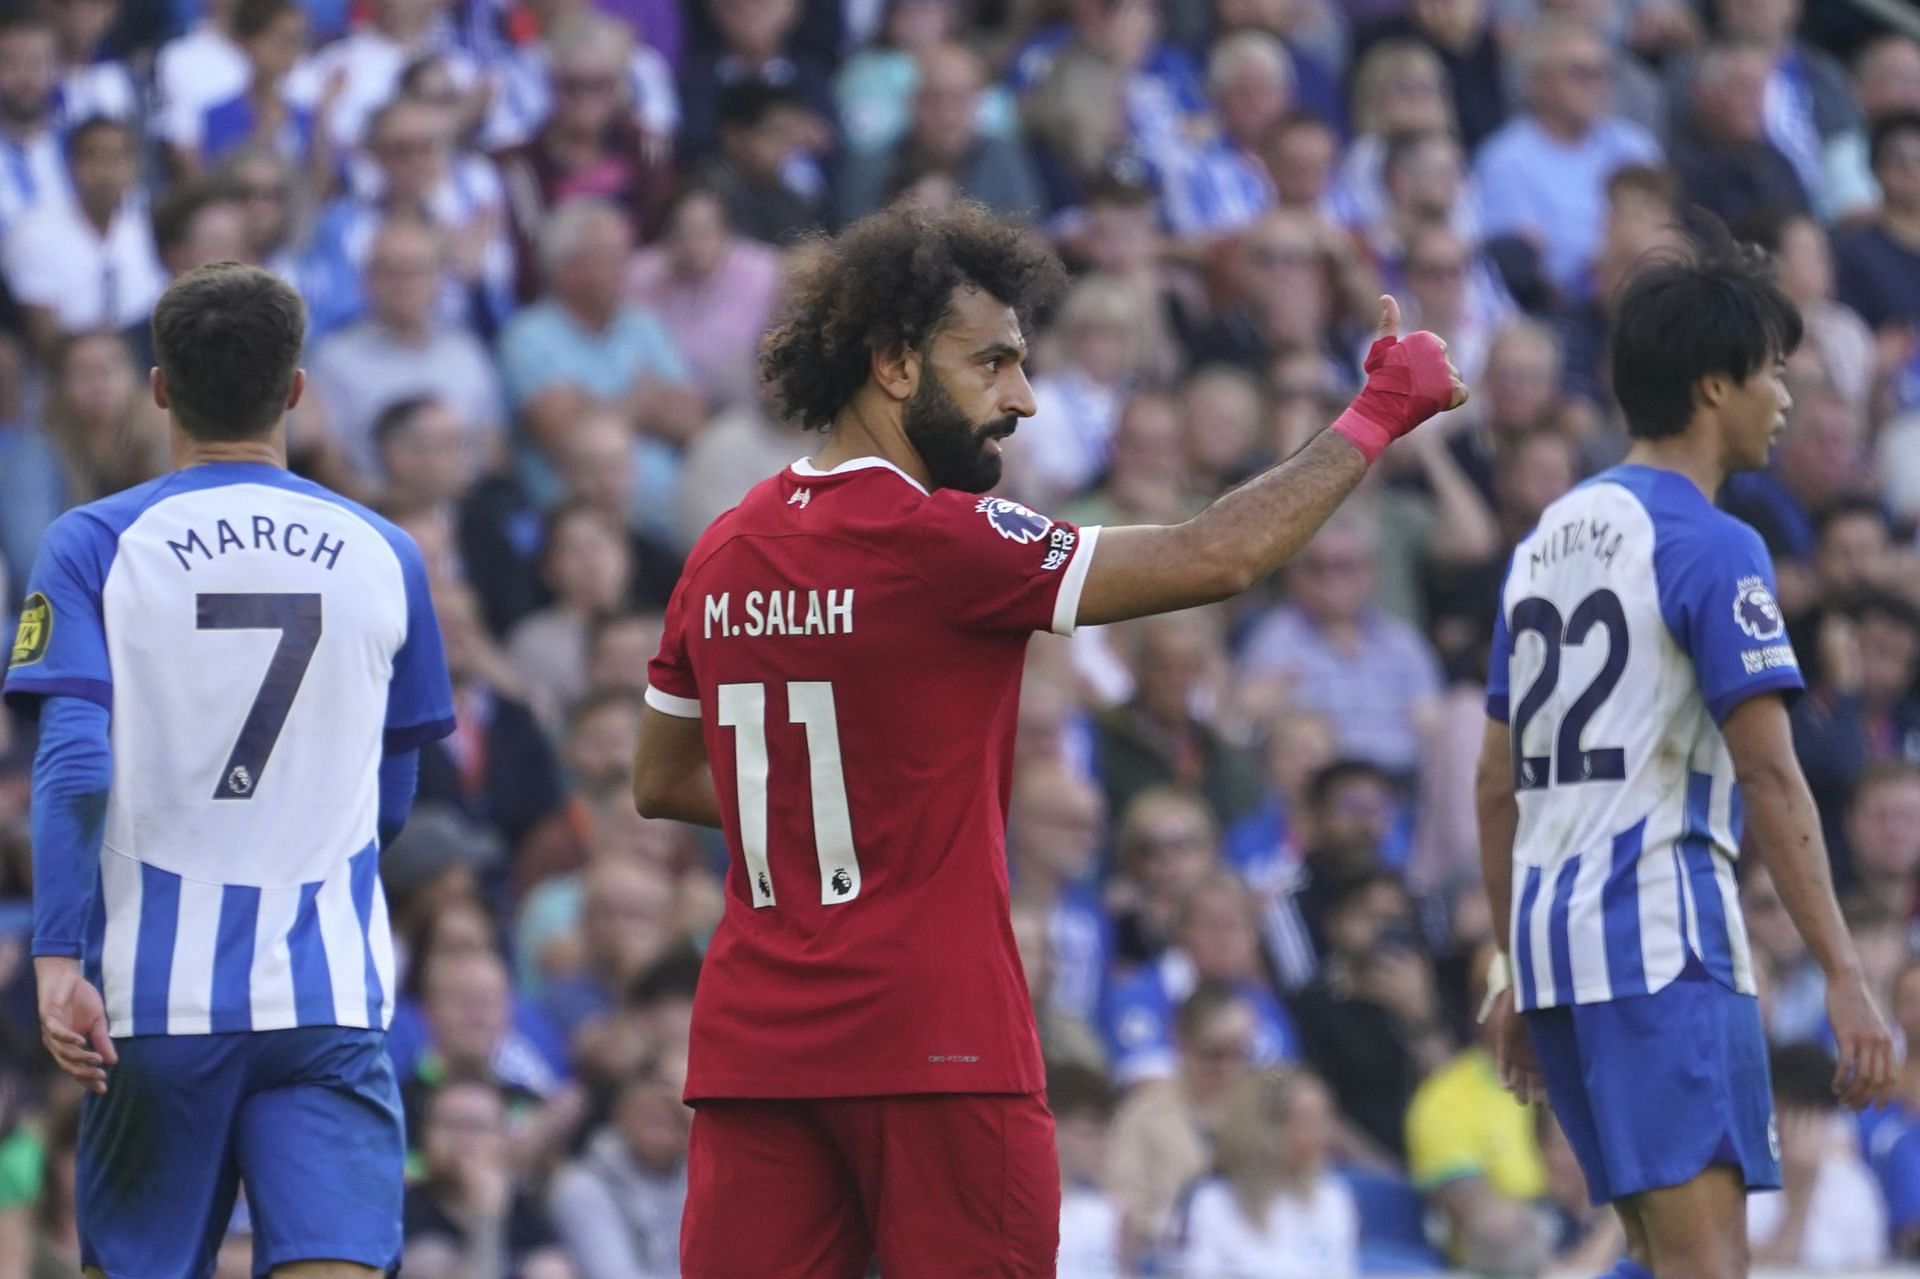 Salah showed excellent composure with both his goals.